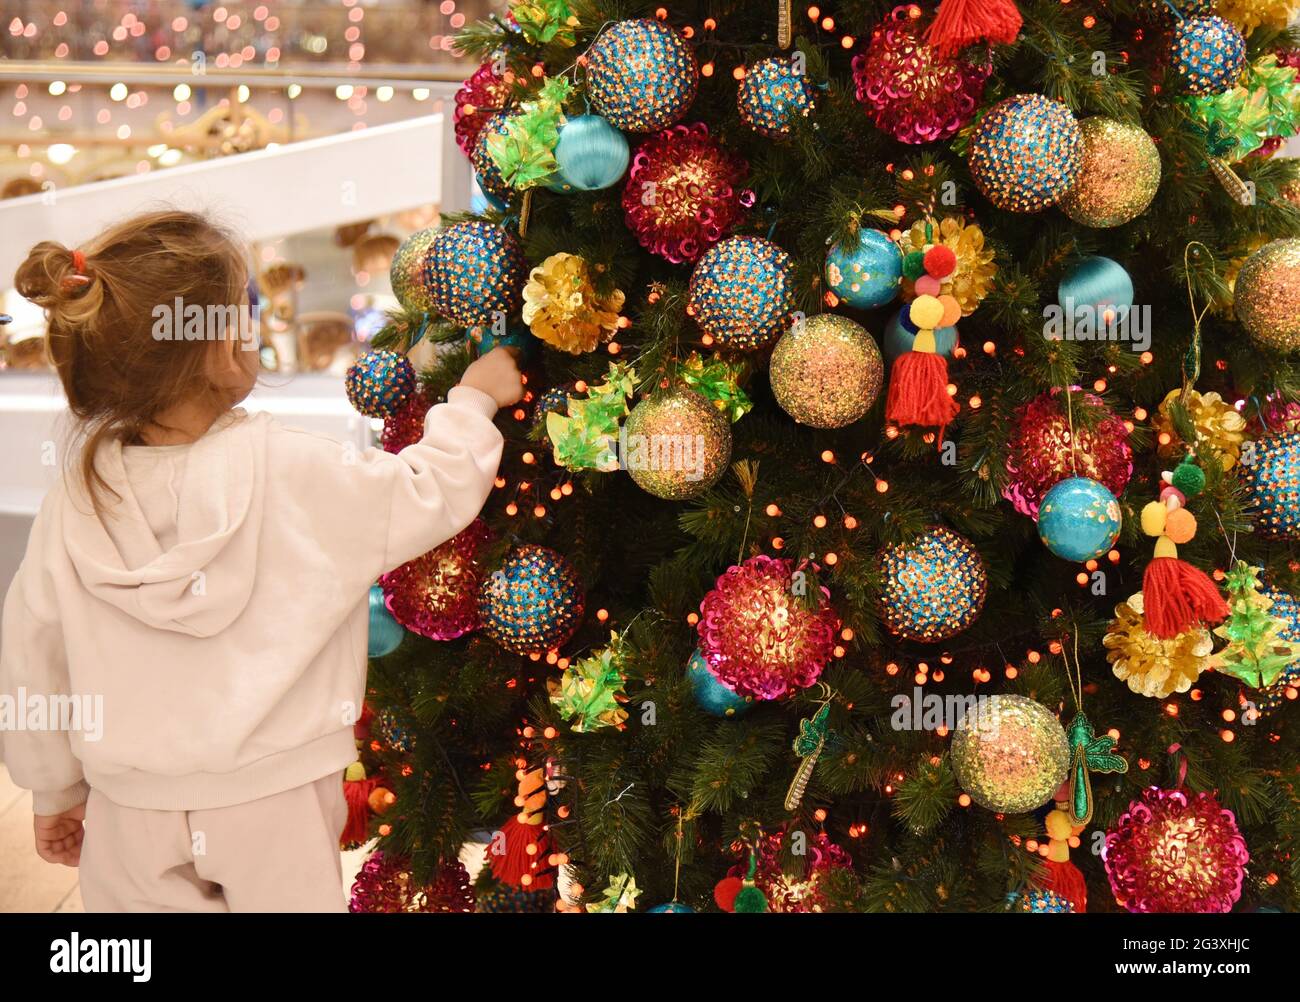 Paris (France): Christmas decorations in the Galeries Lafayette department store on December 15, 2020. Little girl in front of a decorated Christmas t Stock Photo